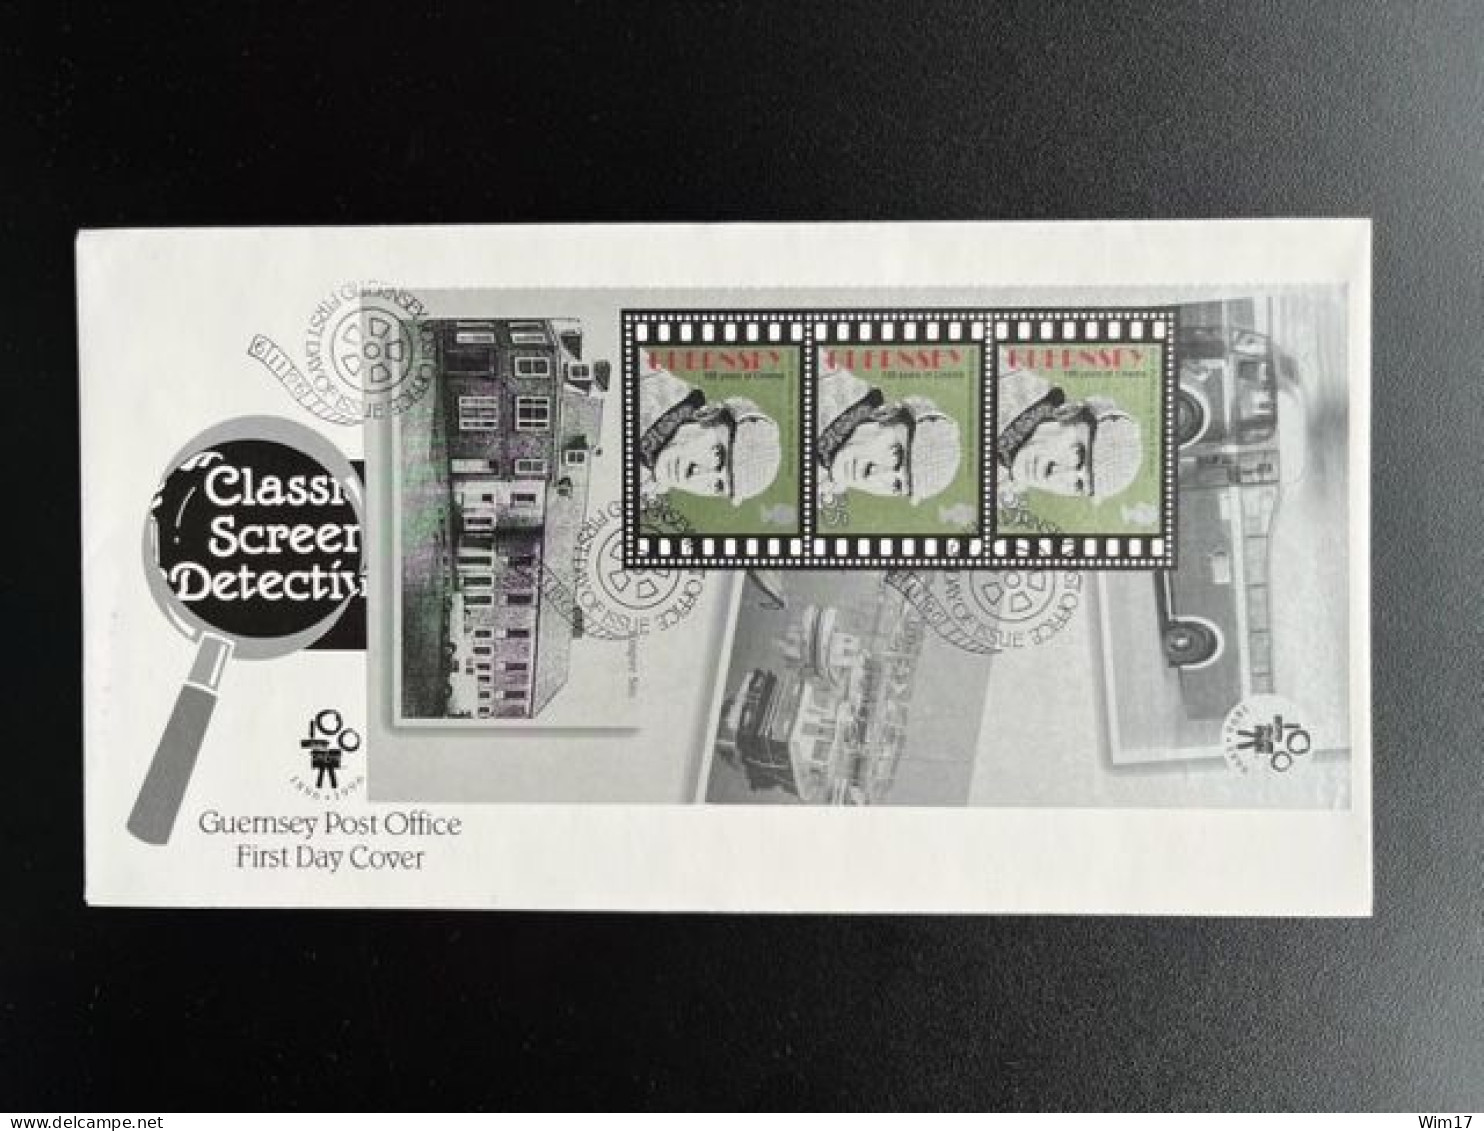 GUERNSEY 1996 FDC CLASSIC SCREEN DETECTIVES SHERLOCK HOLMES - Guernesey